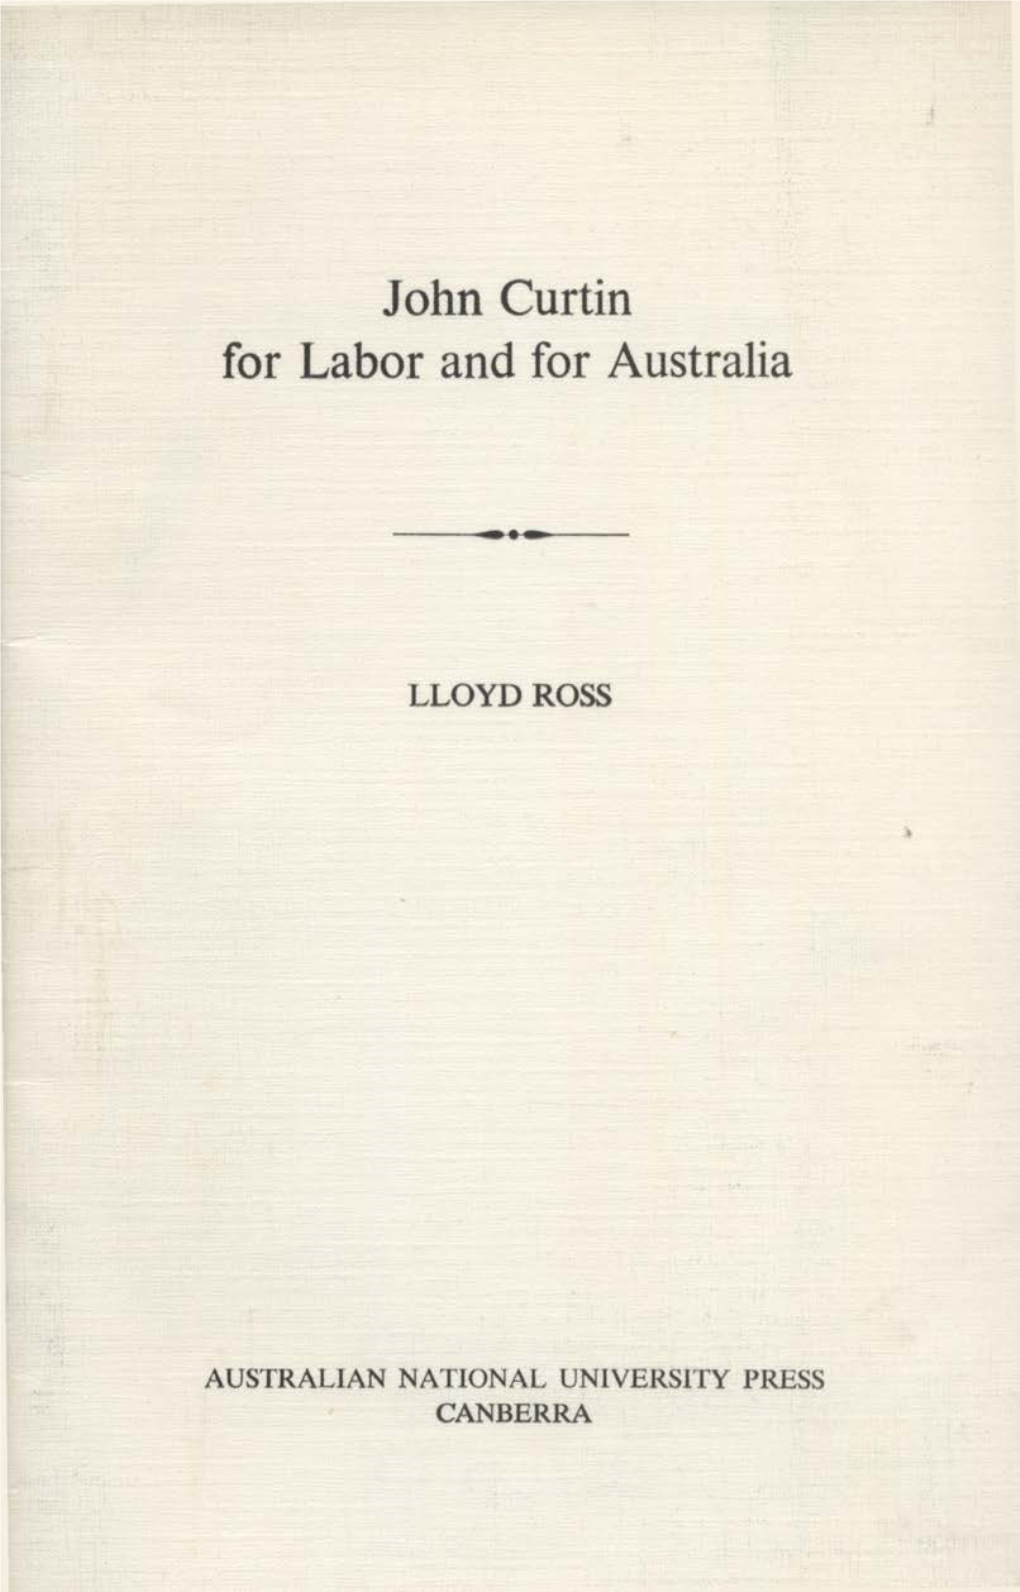 John Curtin for Labor and for Australia